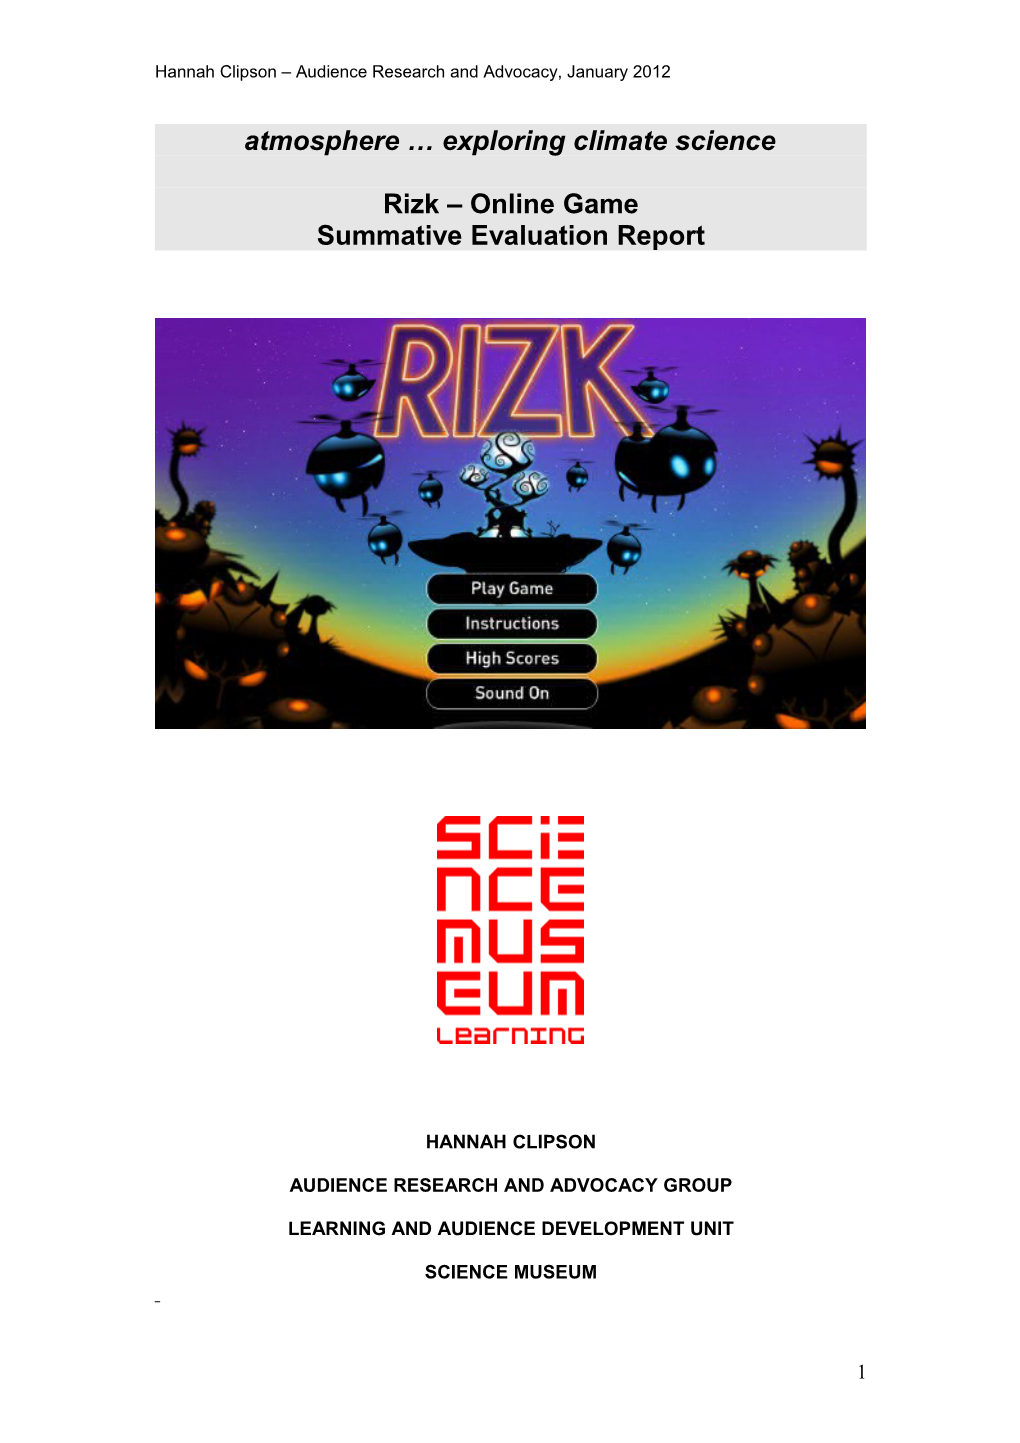 Climate Science Web Game Prototype 3: Rizk